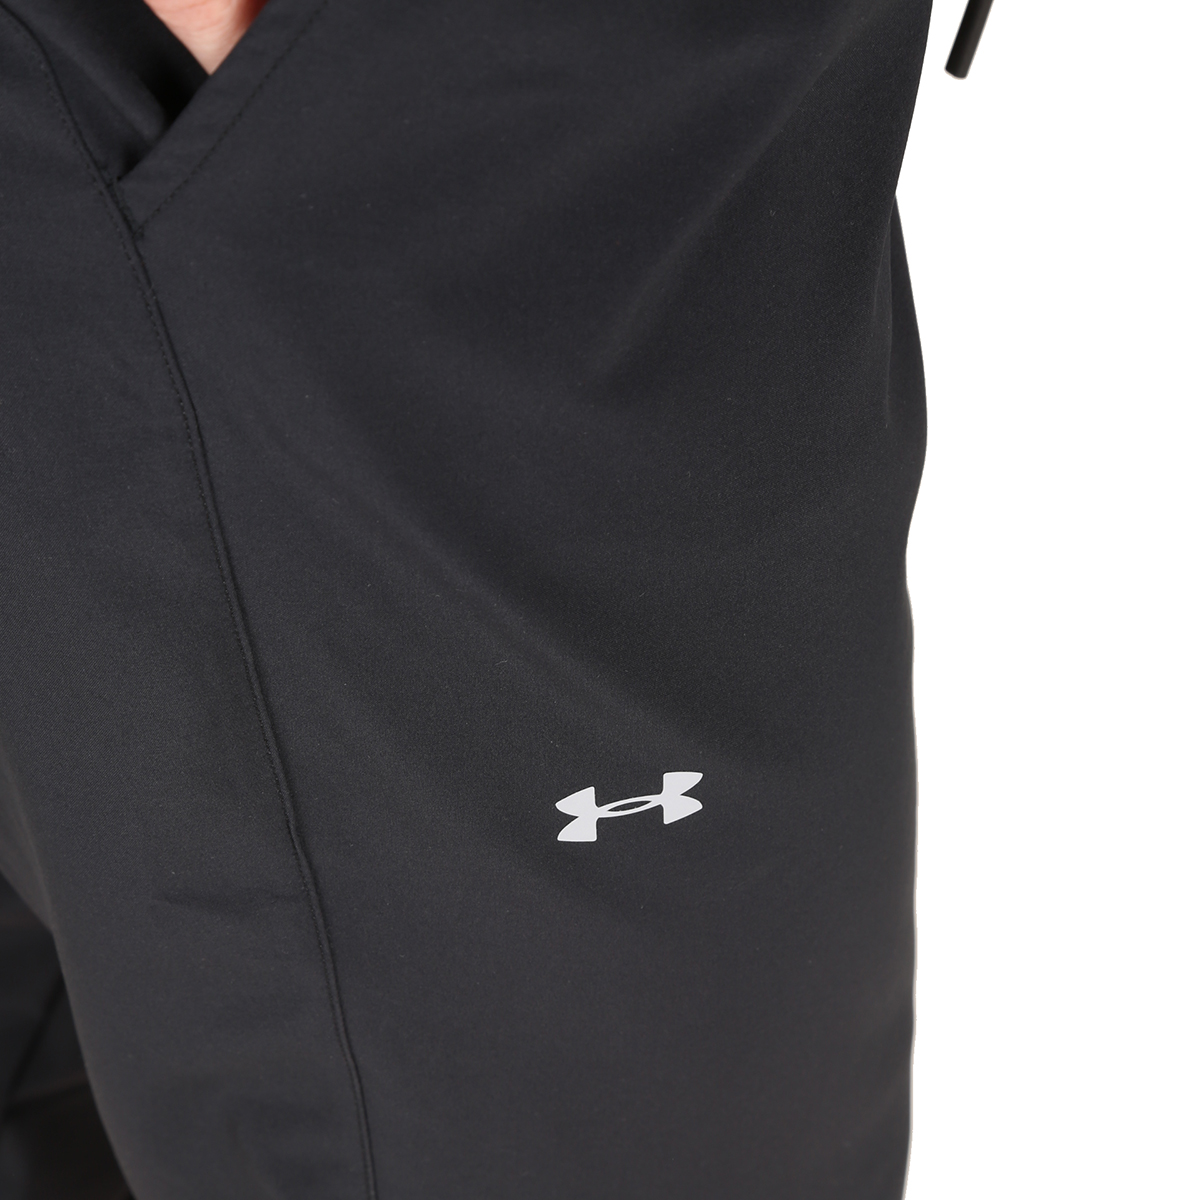 Pantalón Under Armour Sport,  image number null